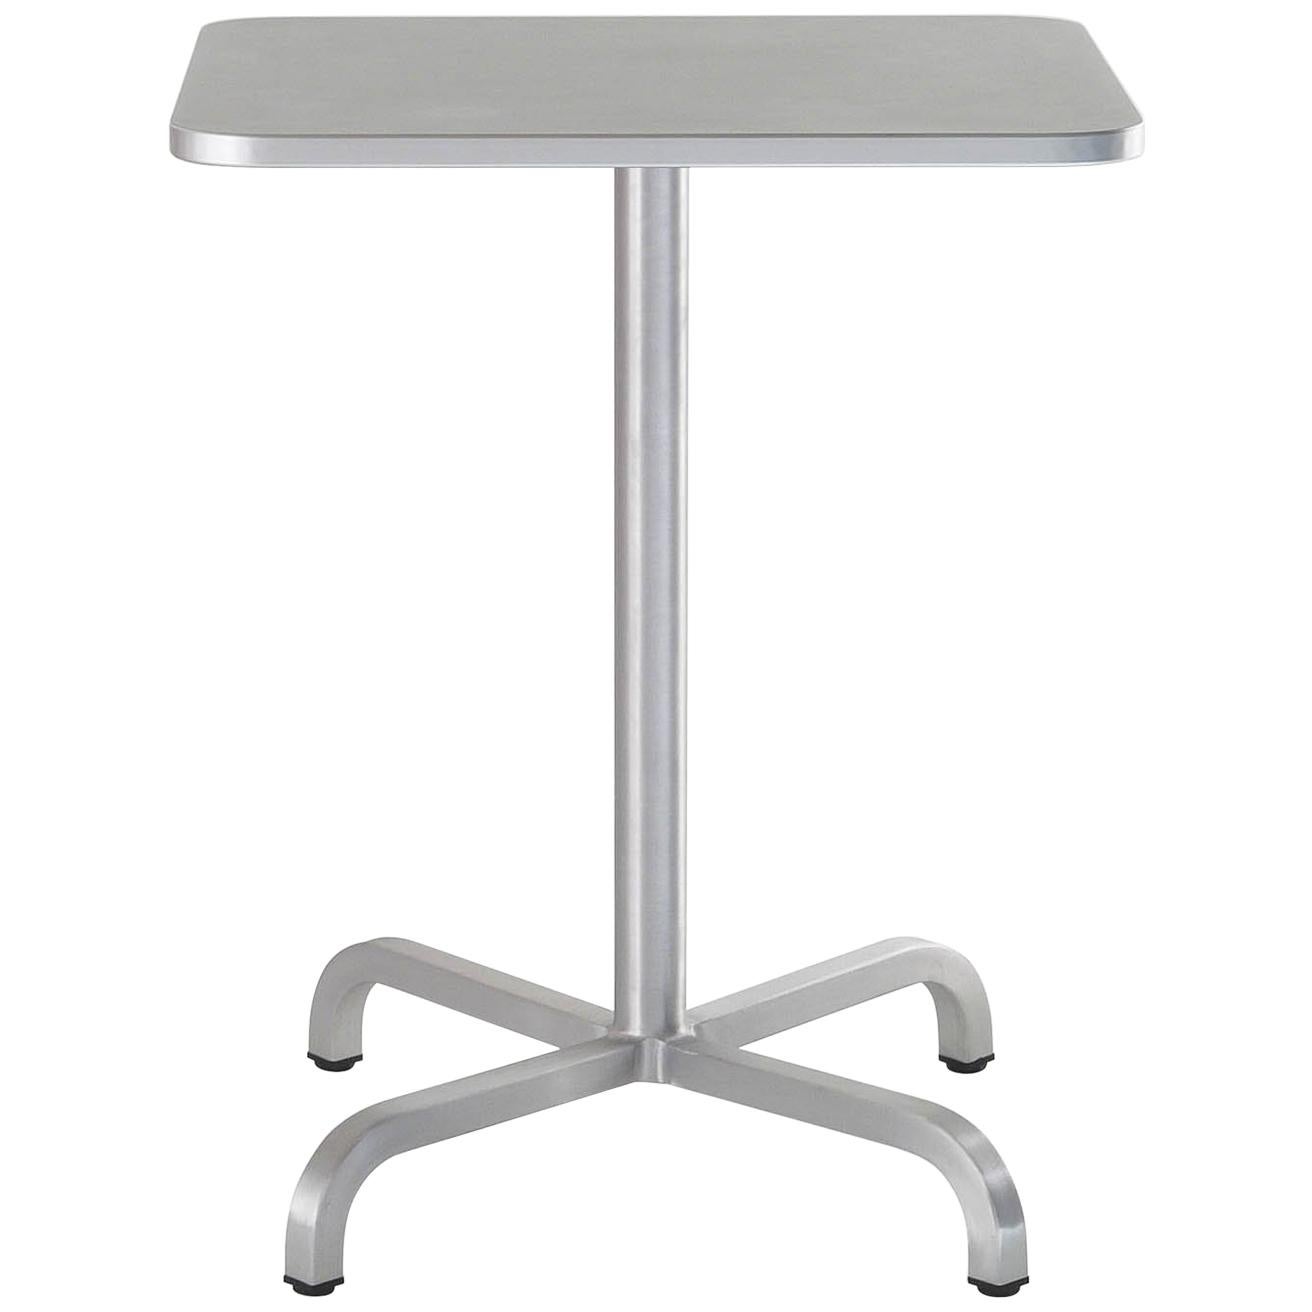 Emeco 20-06 Small Square Café Table with Gray Laminate Top by Norman Foster For Sale